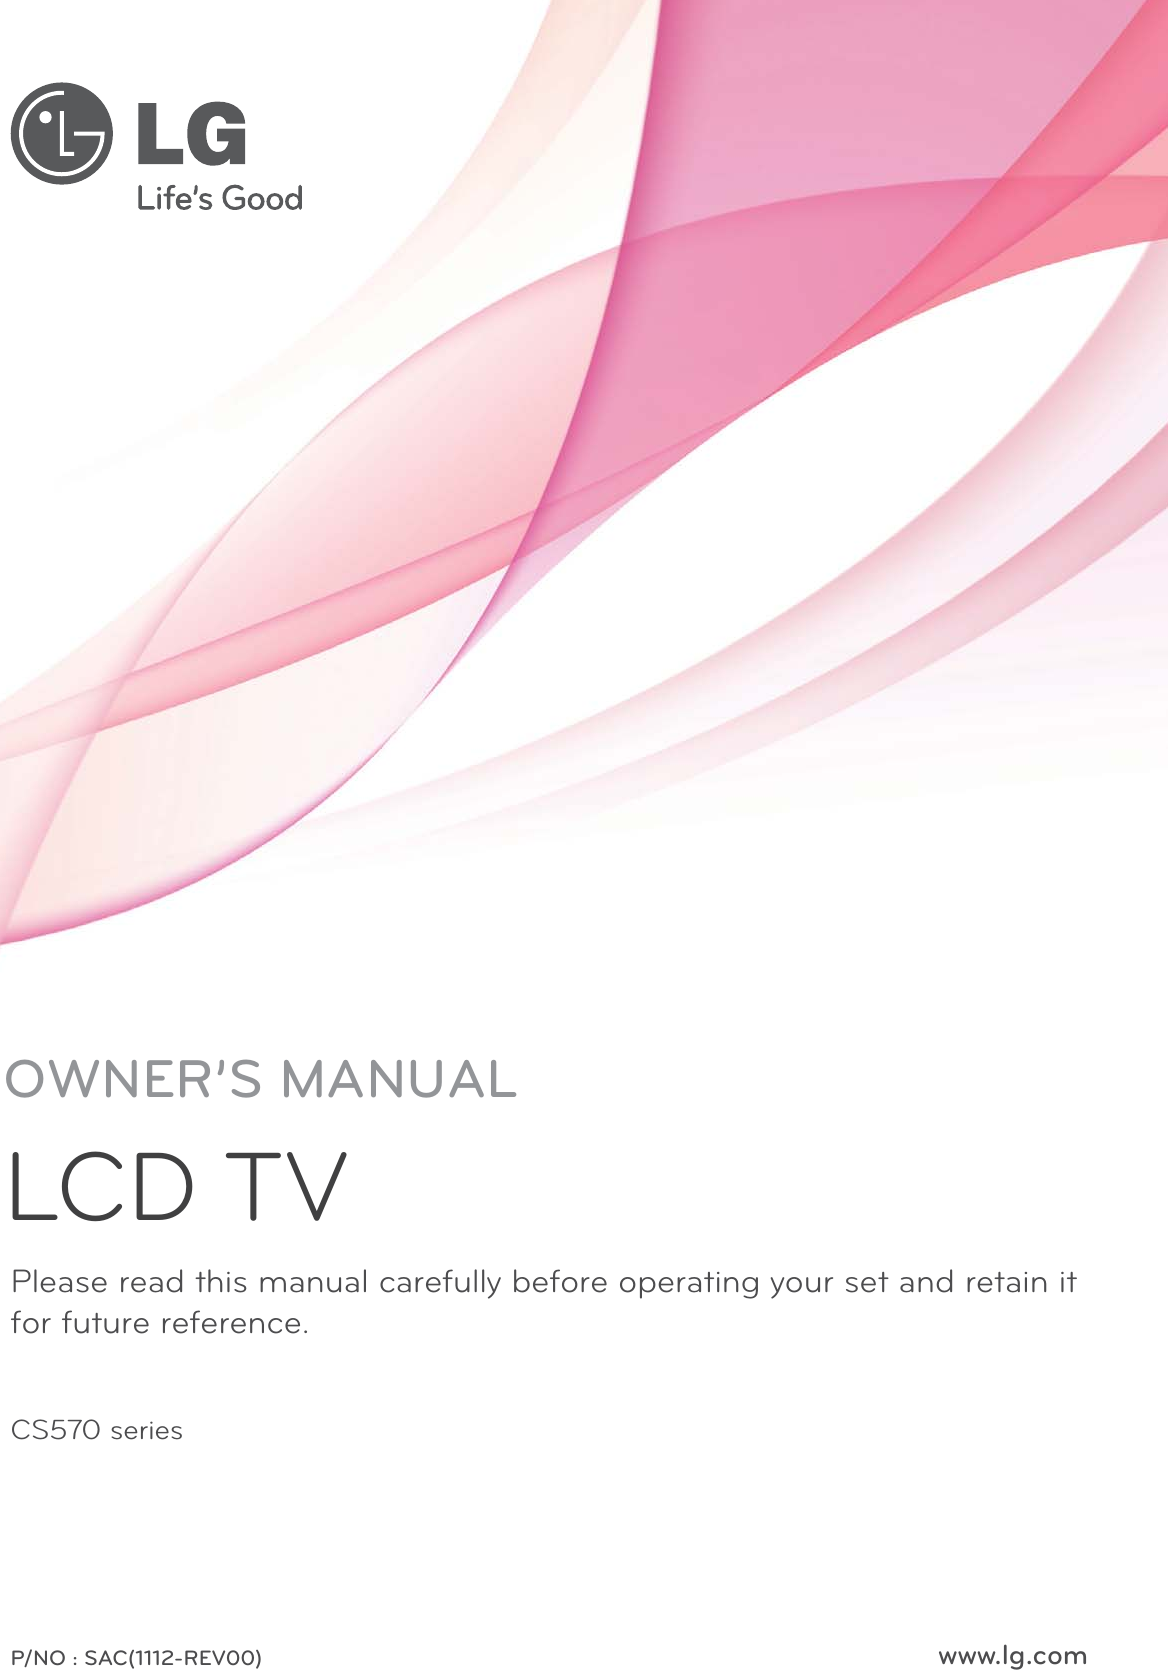 www.lg.comPlease read this manual carefully before operating your set and retain it for future reference.CS570 seriesP/NO : SAC(1112-REV00)OWNER’S MANUALLCD TV